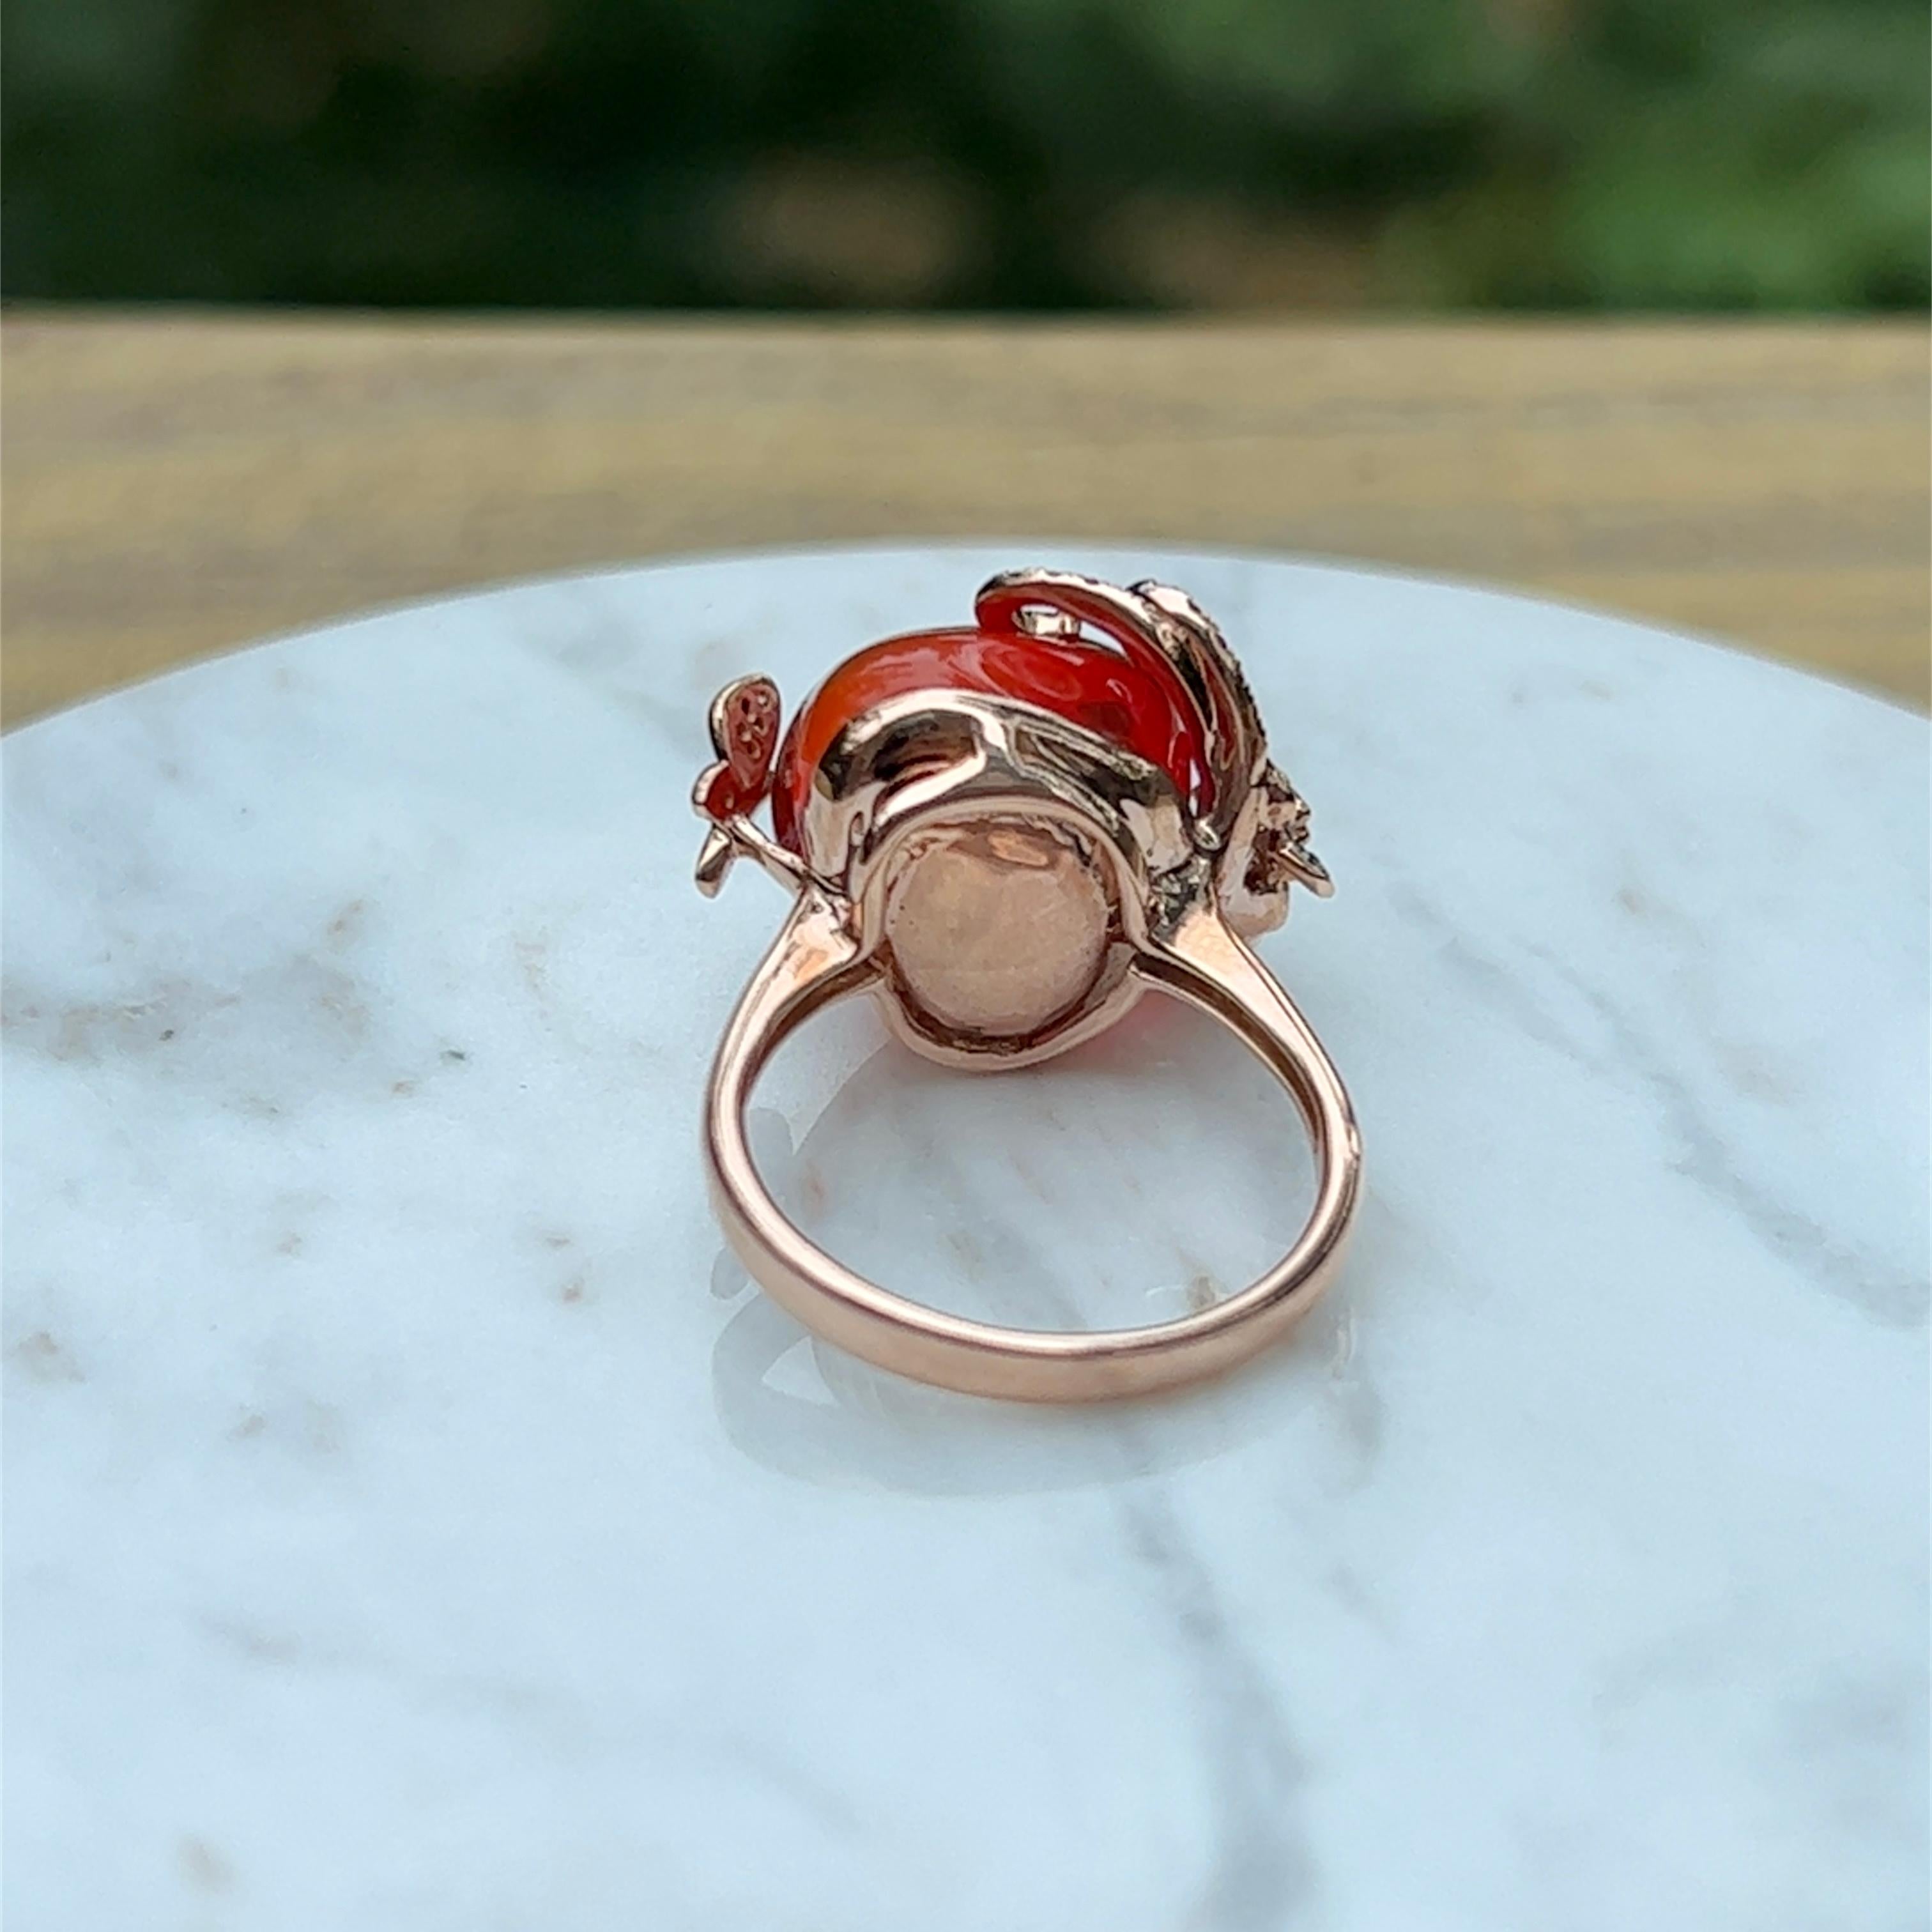 12.24 Carat Mexican Fire Opal with Diamonds and Rubies in 14K Rose Gold 2